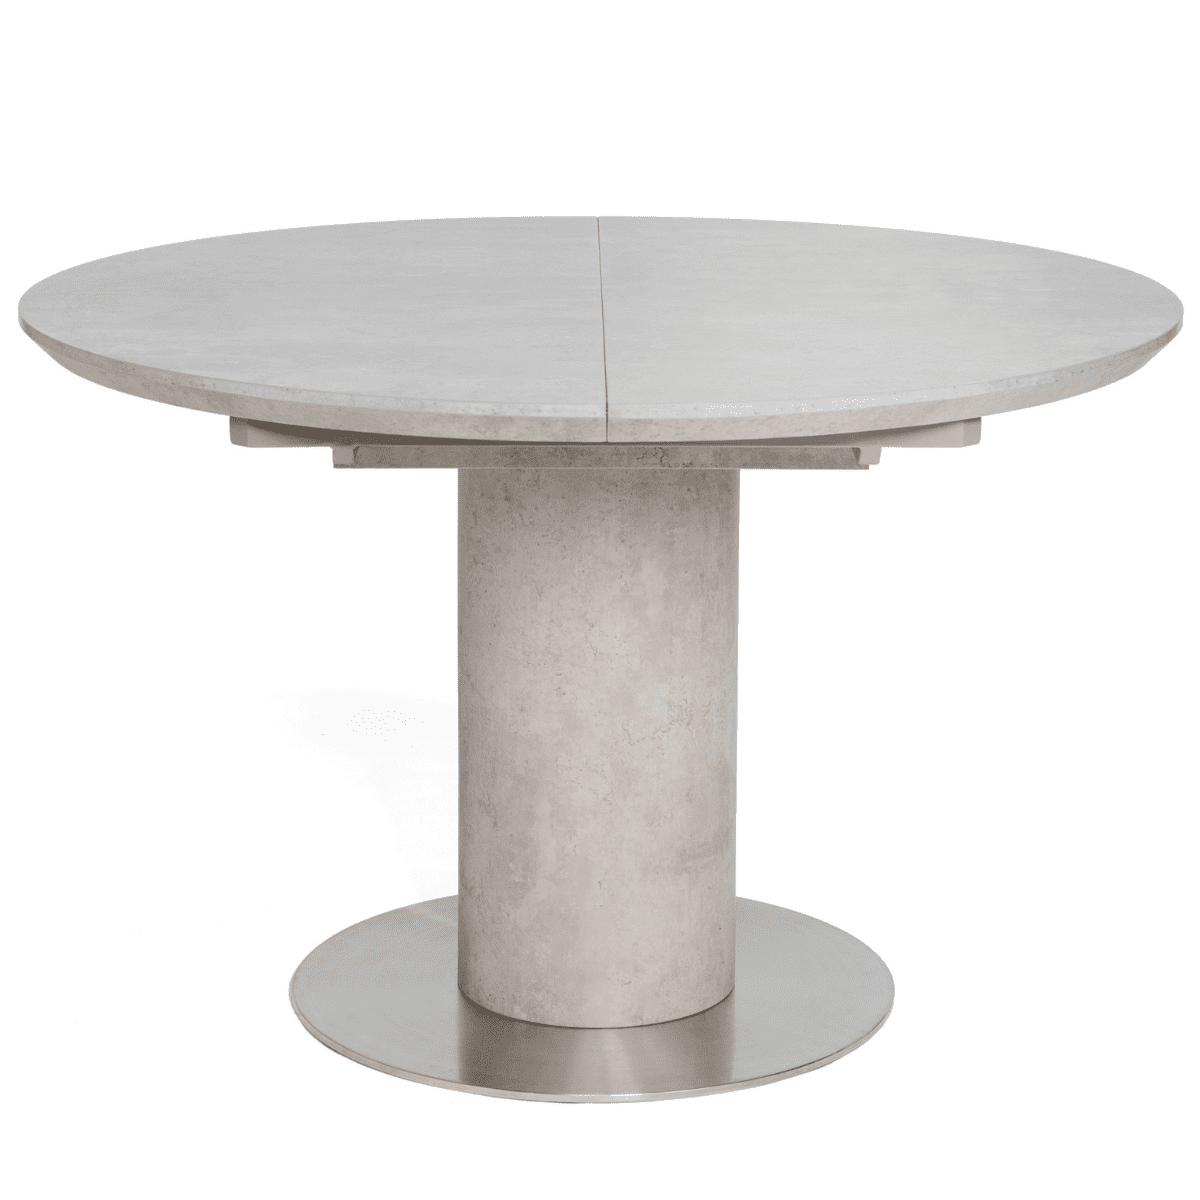 Denny Round Concrete Effect Dining Table